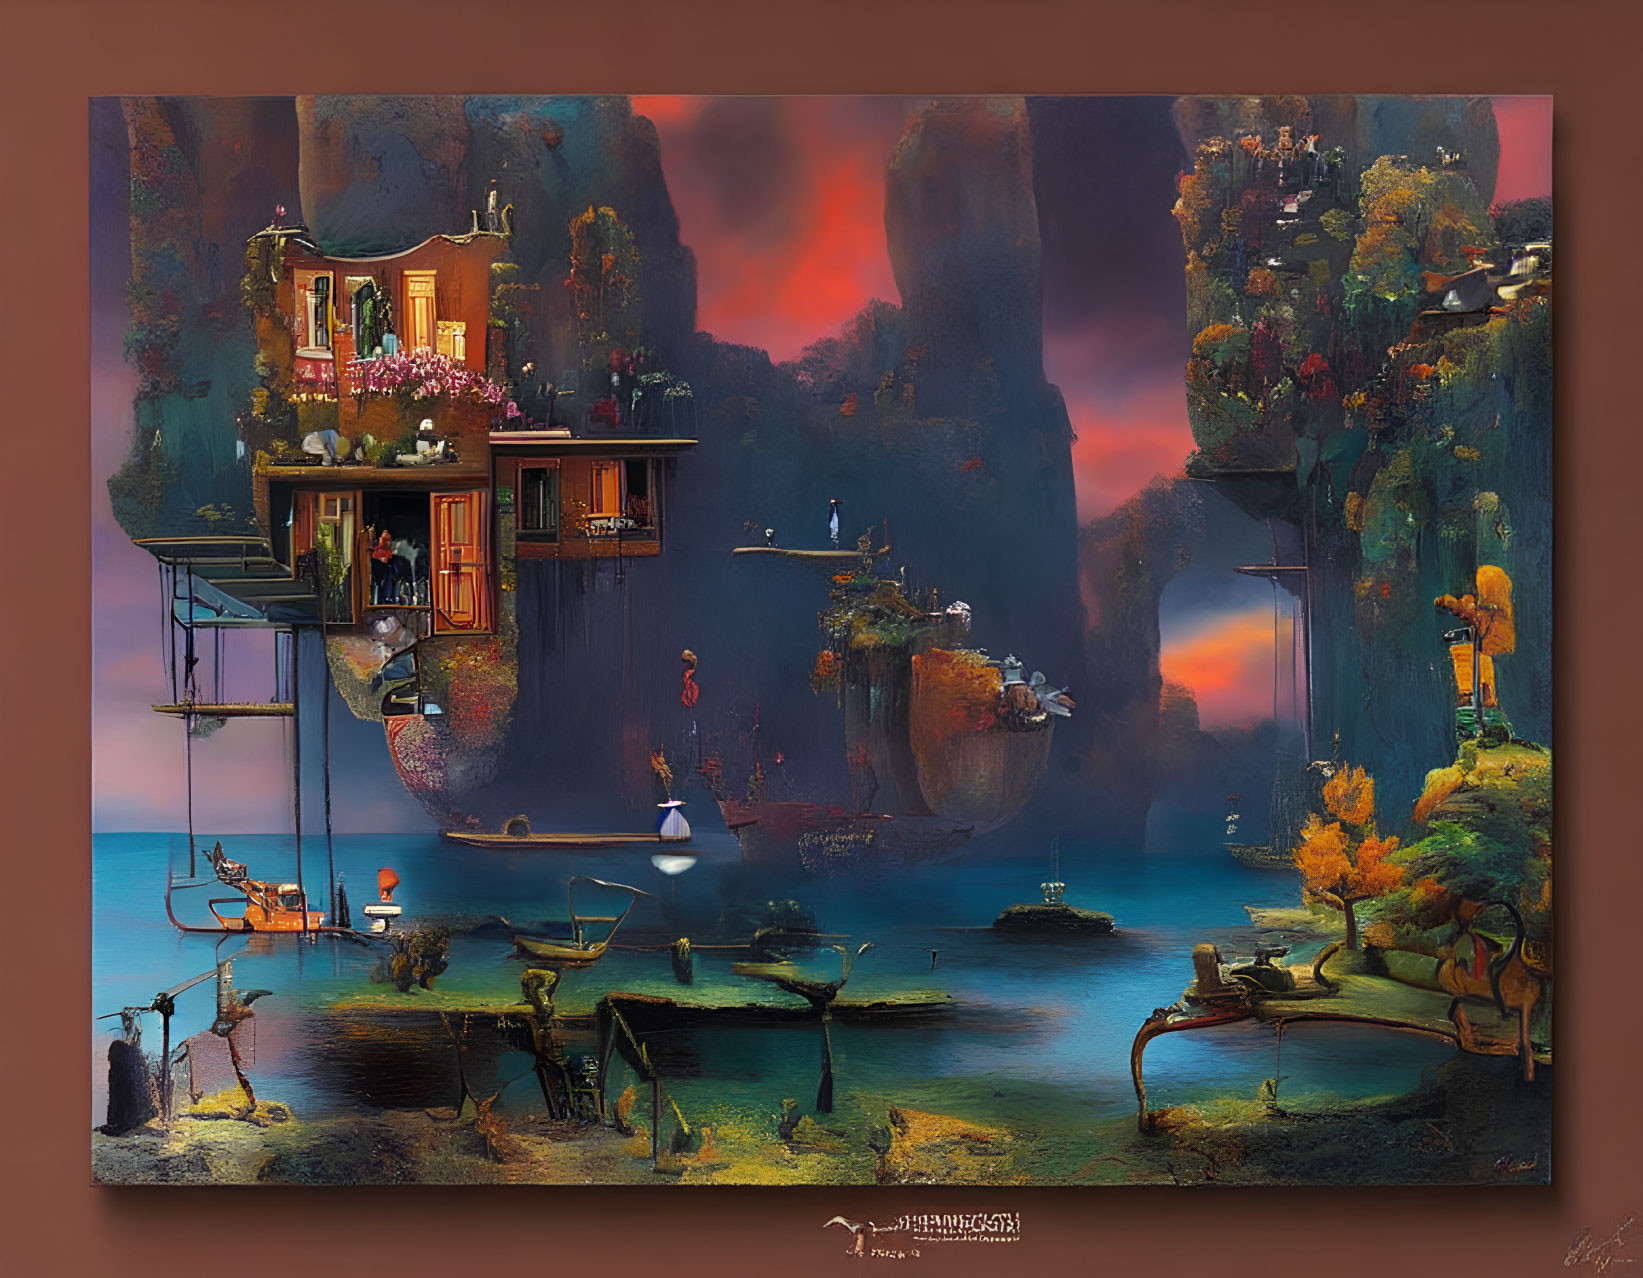 Surreal landscape with floating islands and vibrant skies